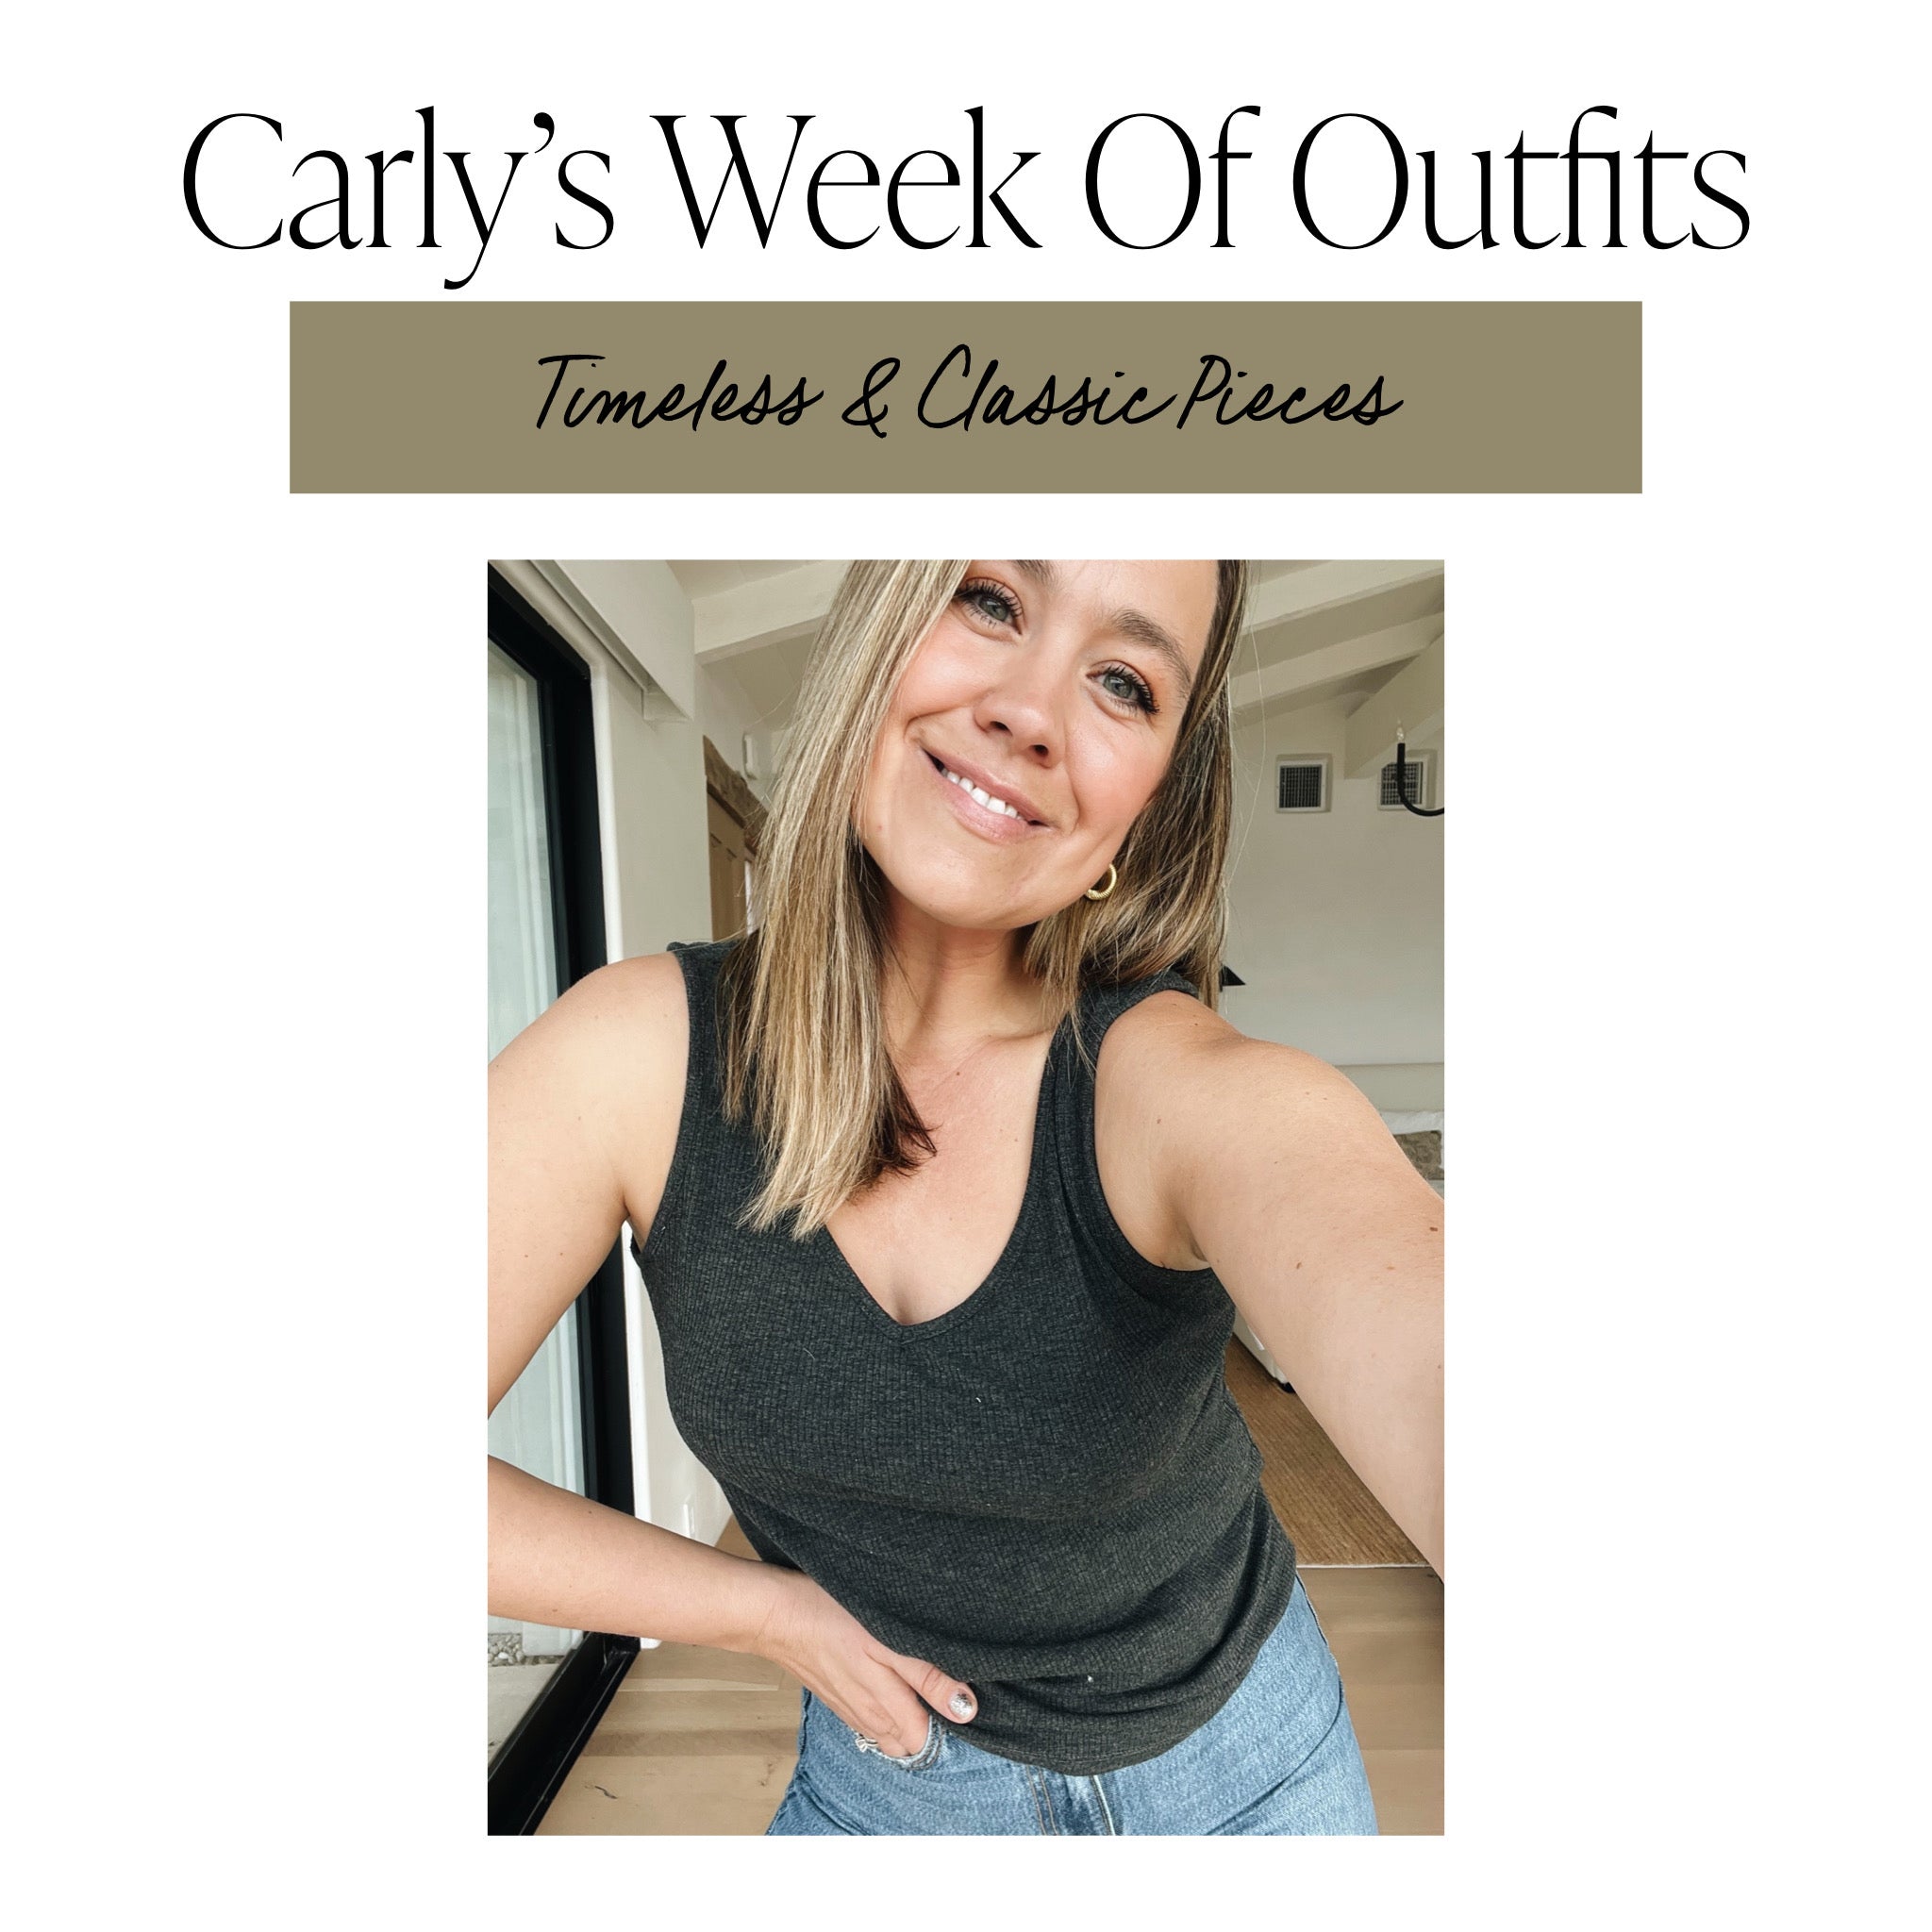 Carly's Week of Outfits!